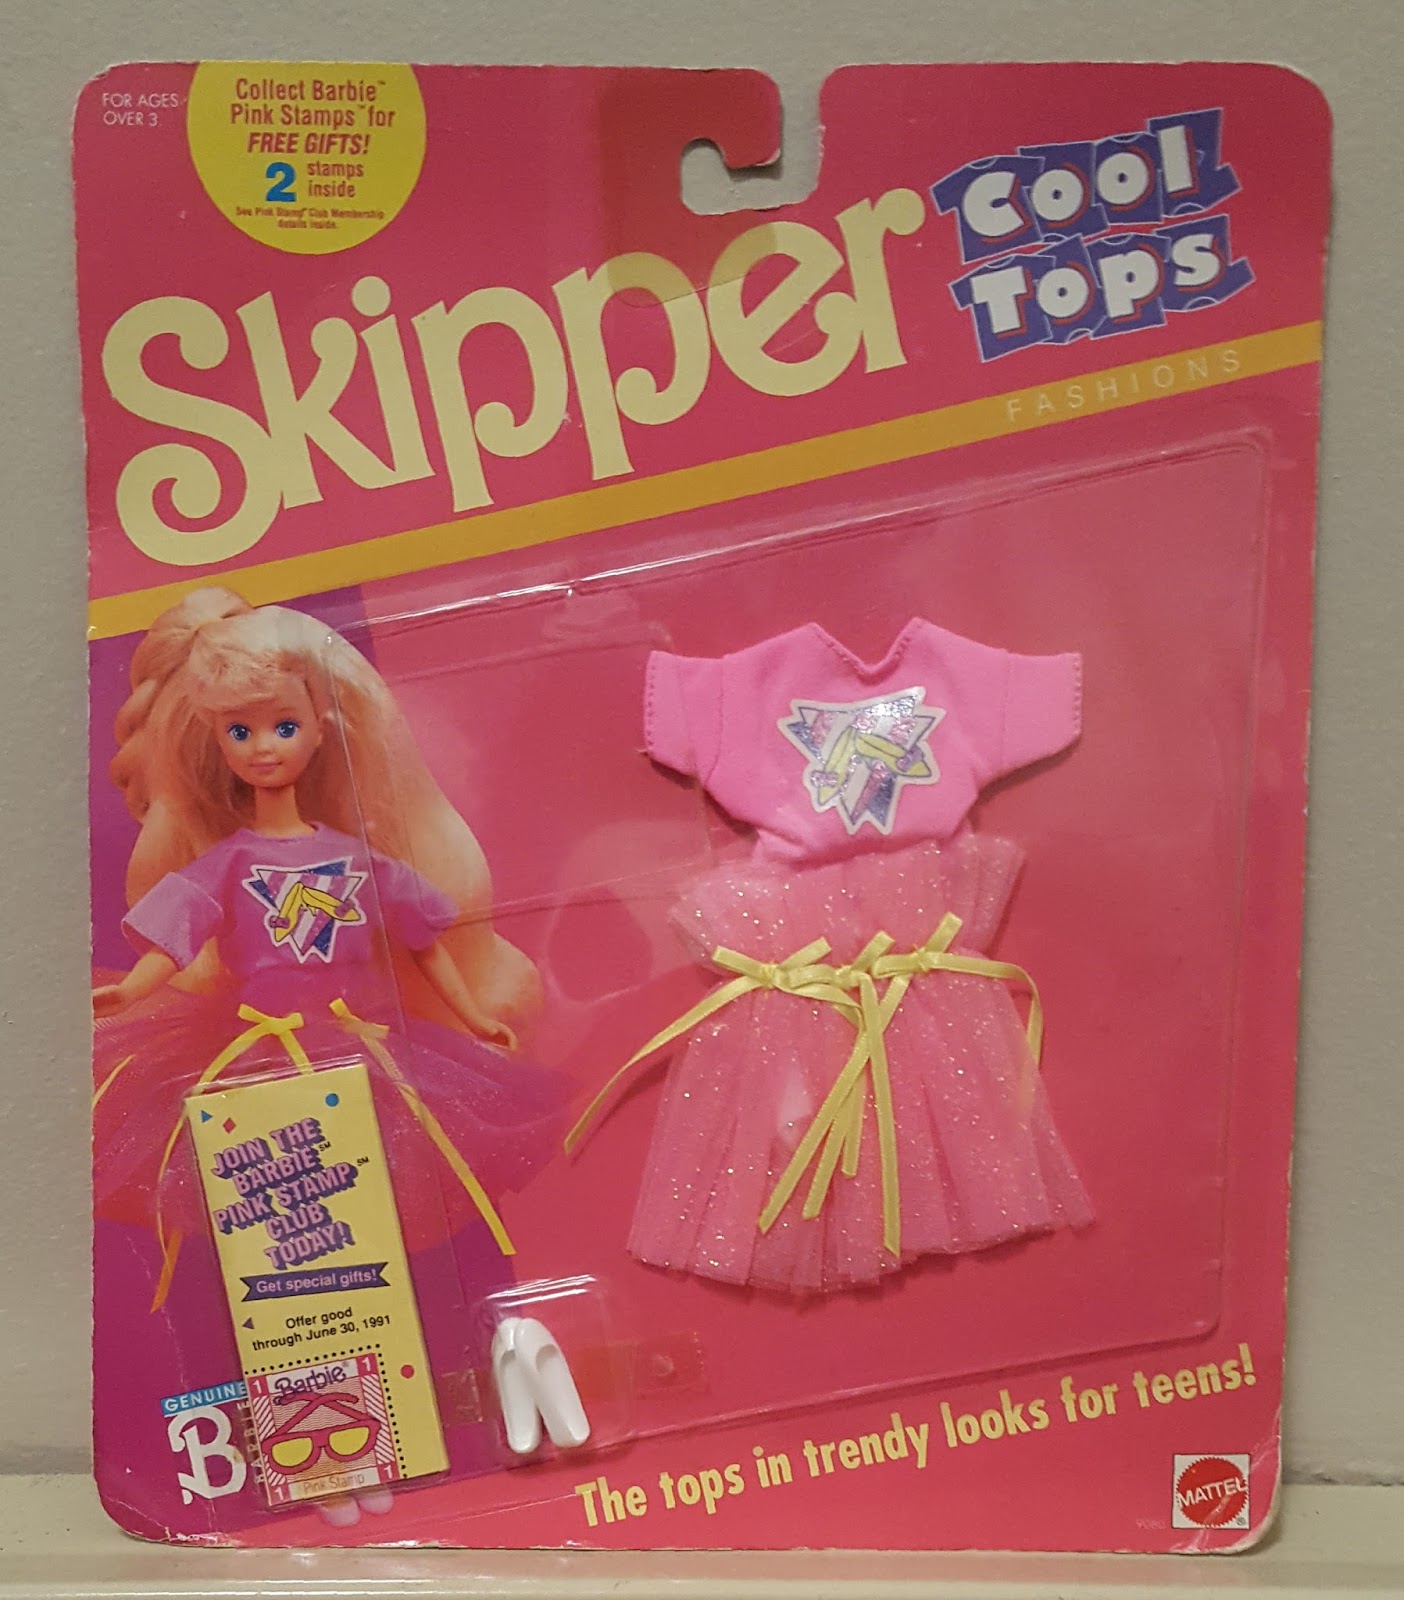 Confessions of a Dolly Dolly Dress Discussion: Cool Skipper